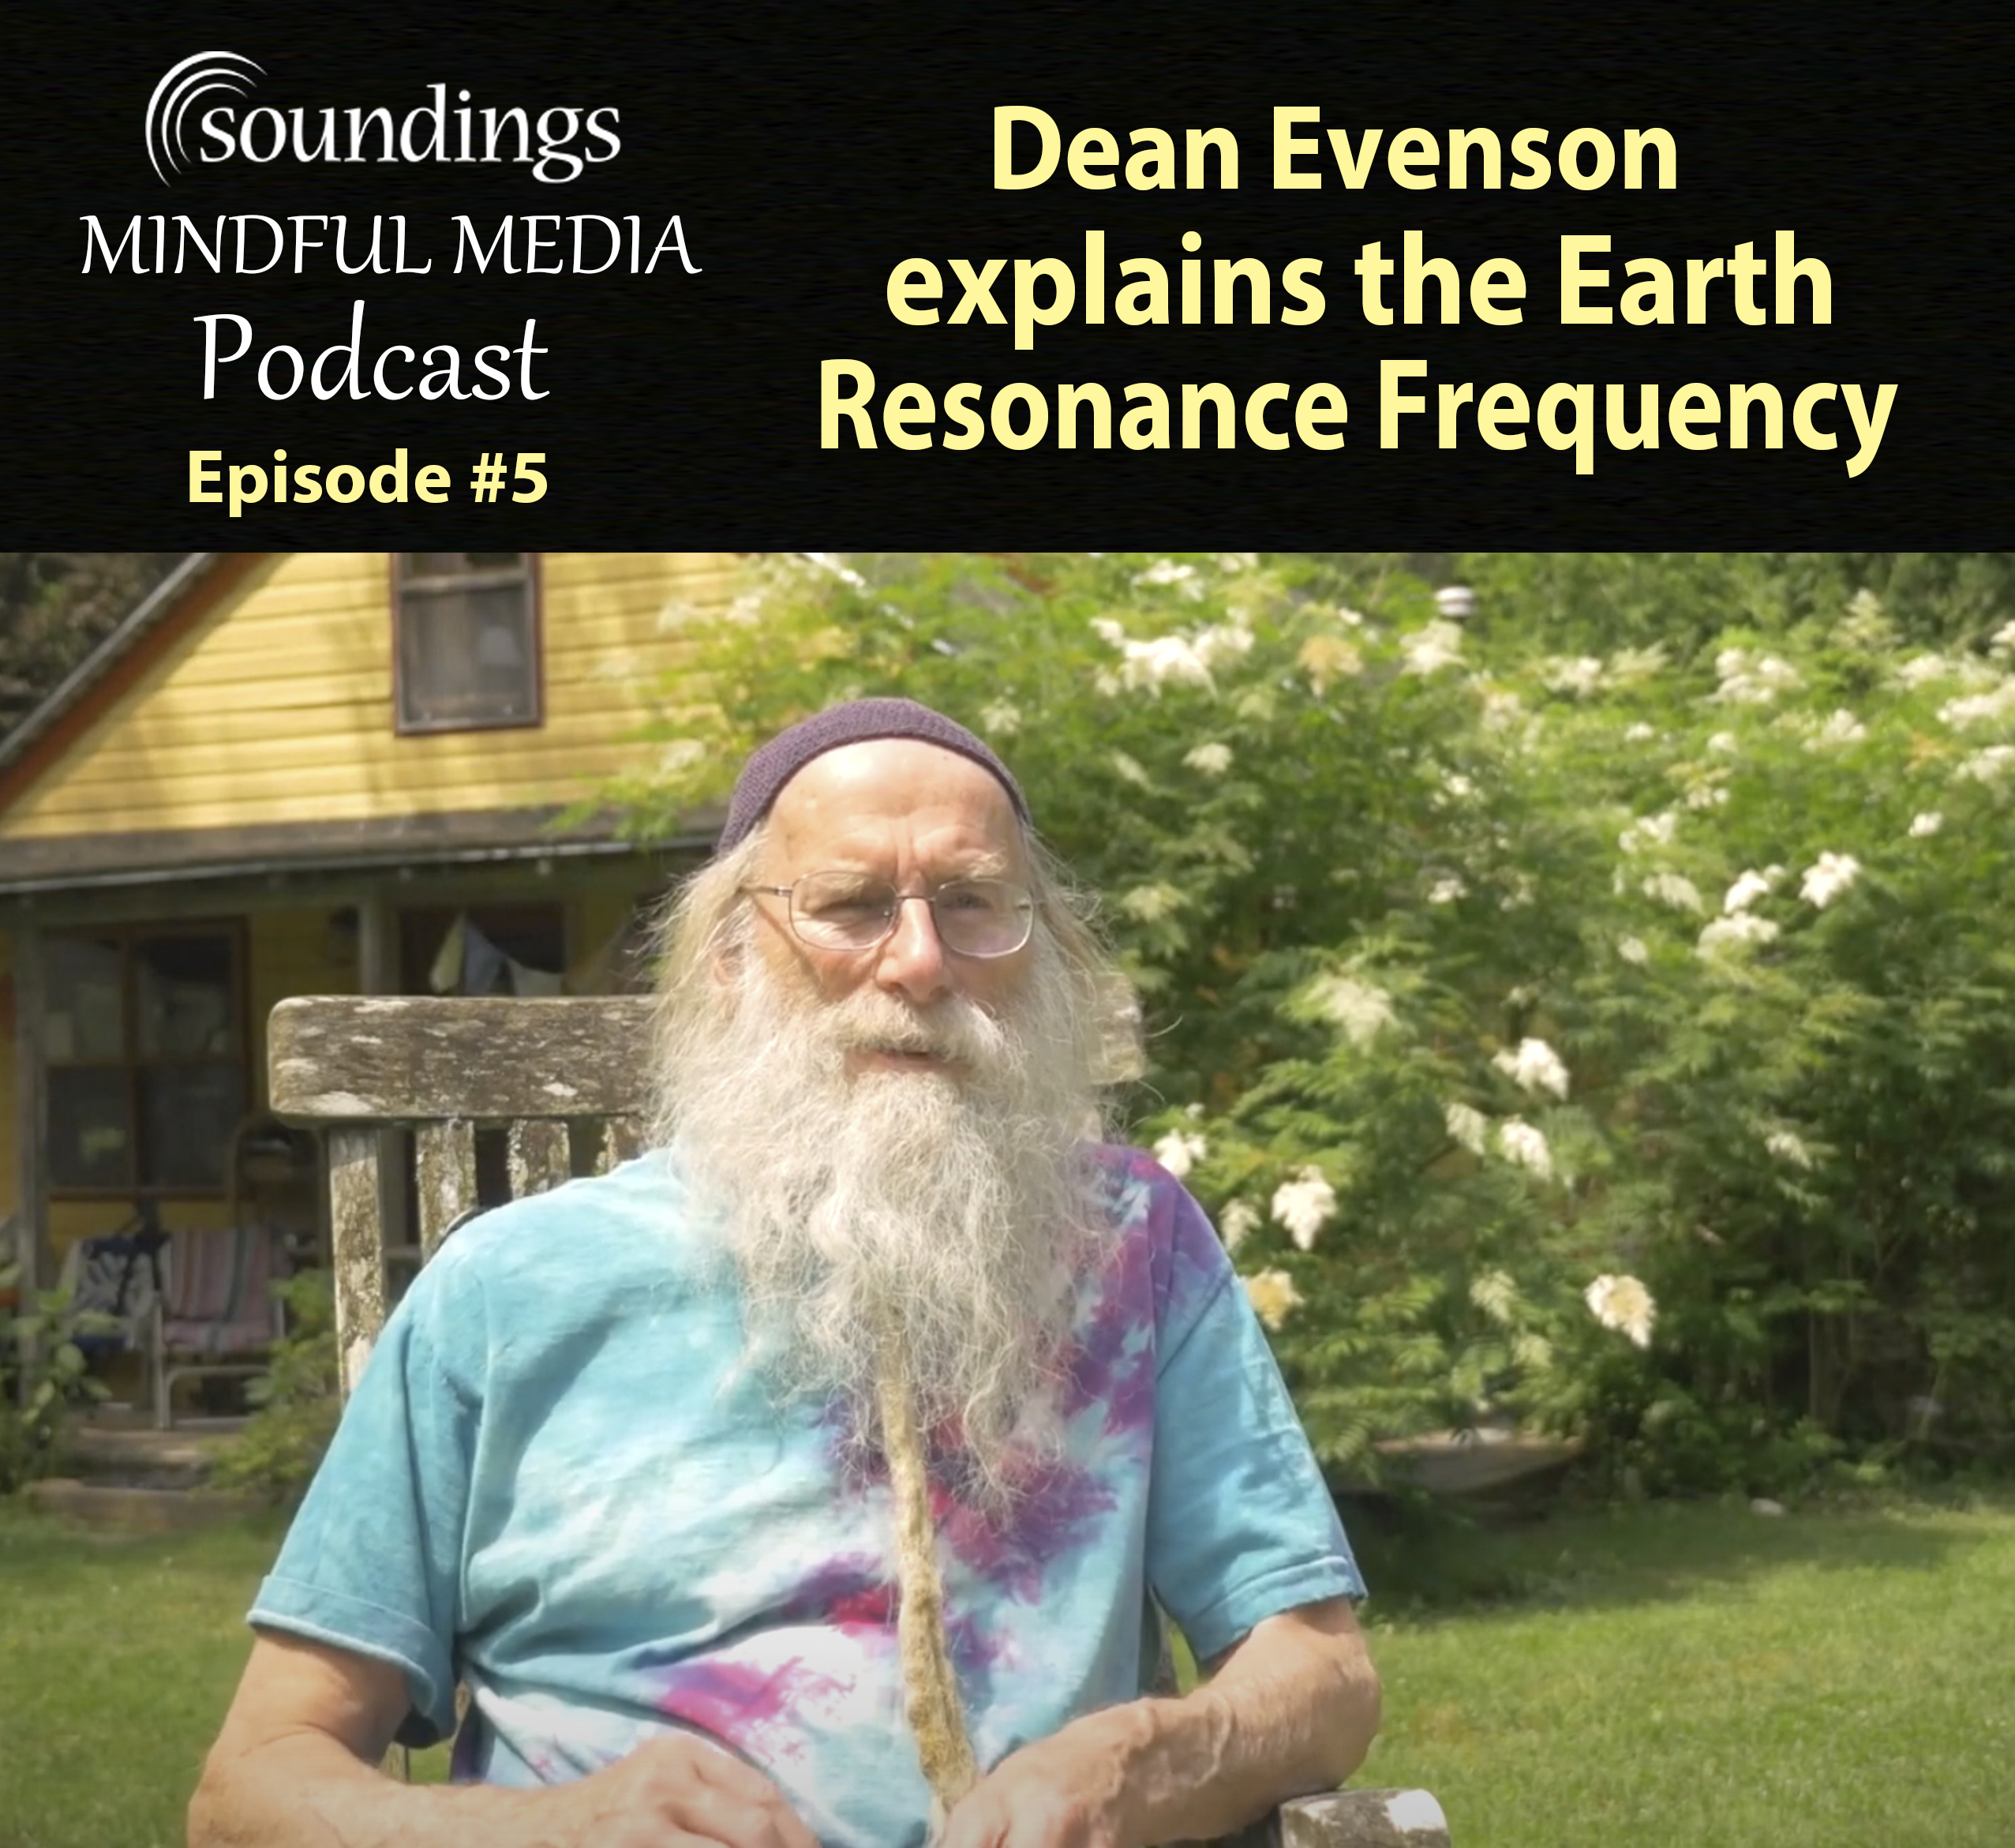 Dean Evenson explains the Earth Resonance Frequency